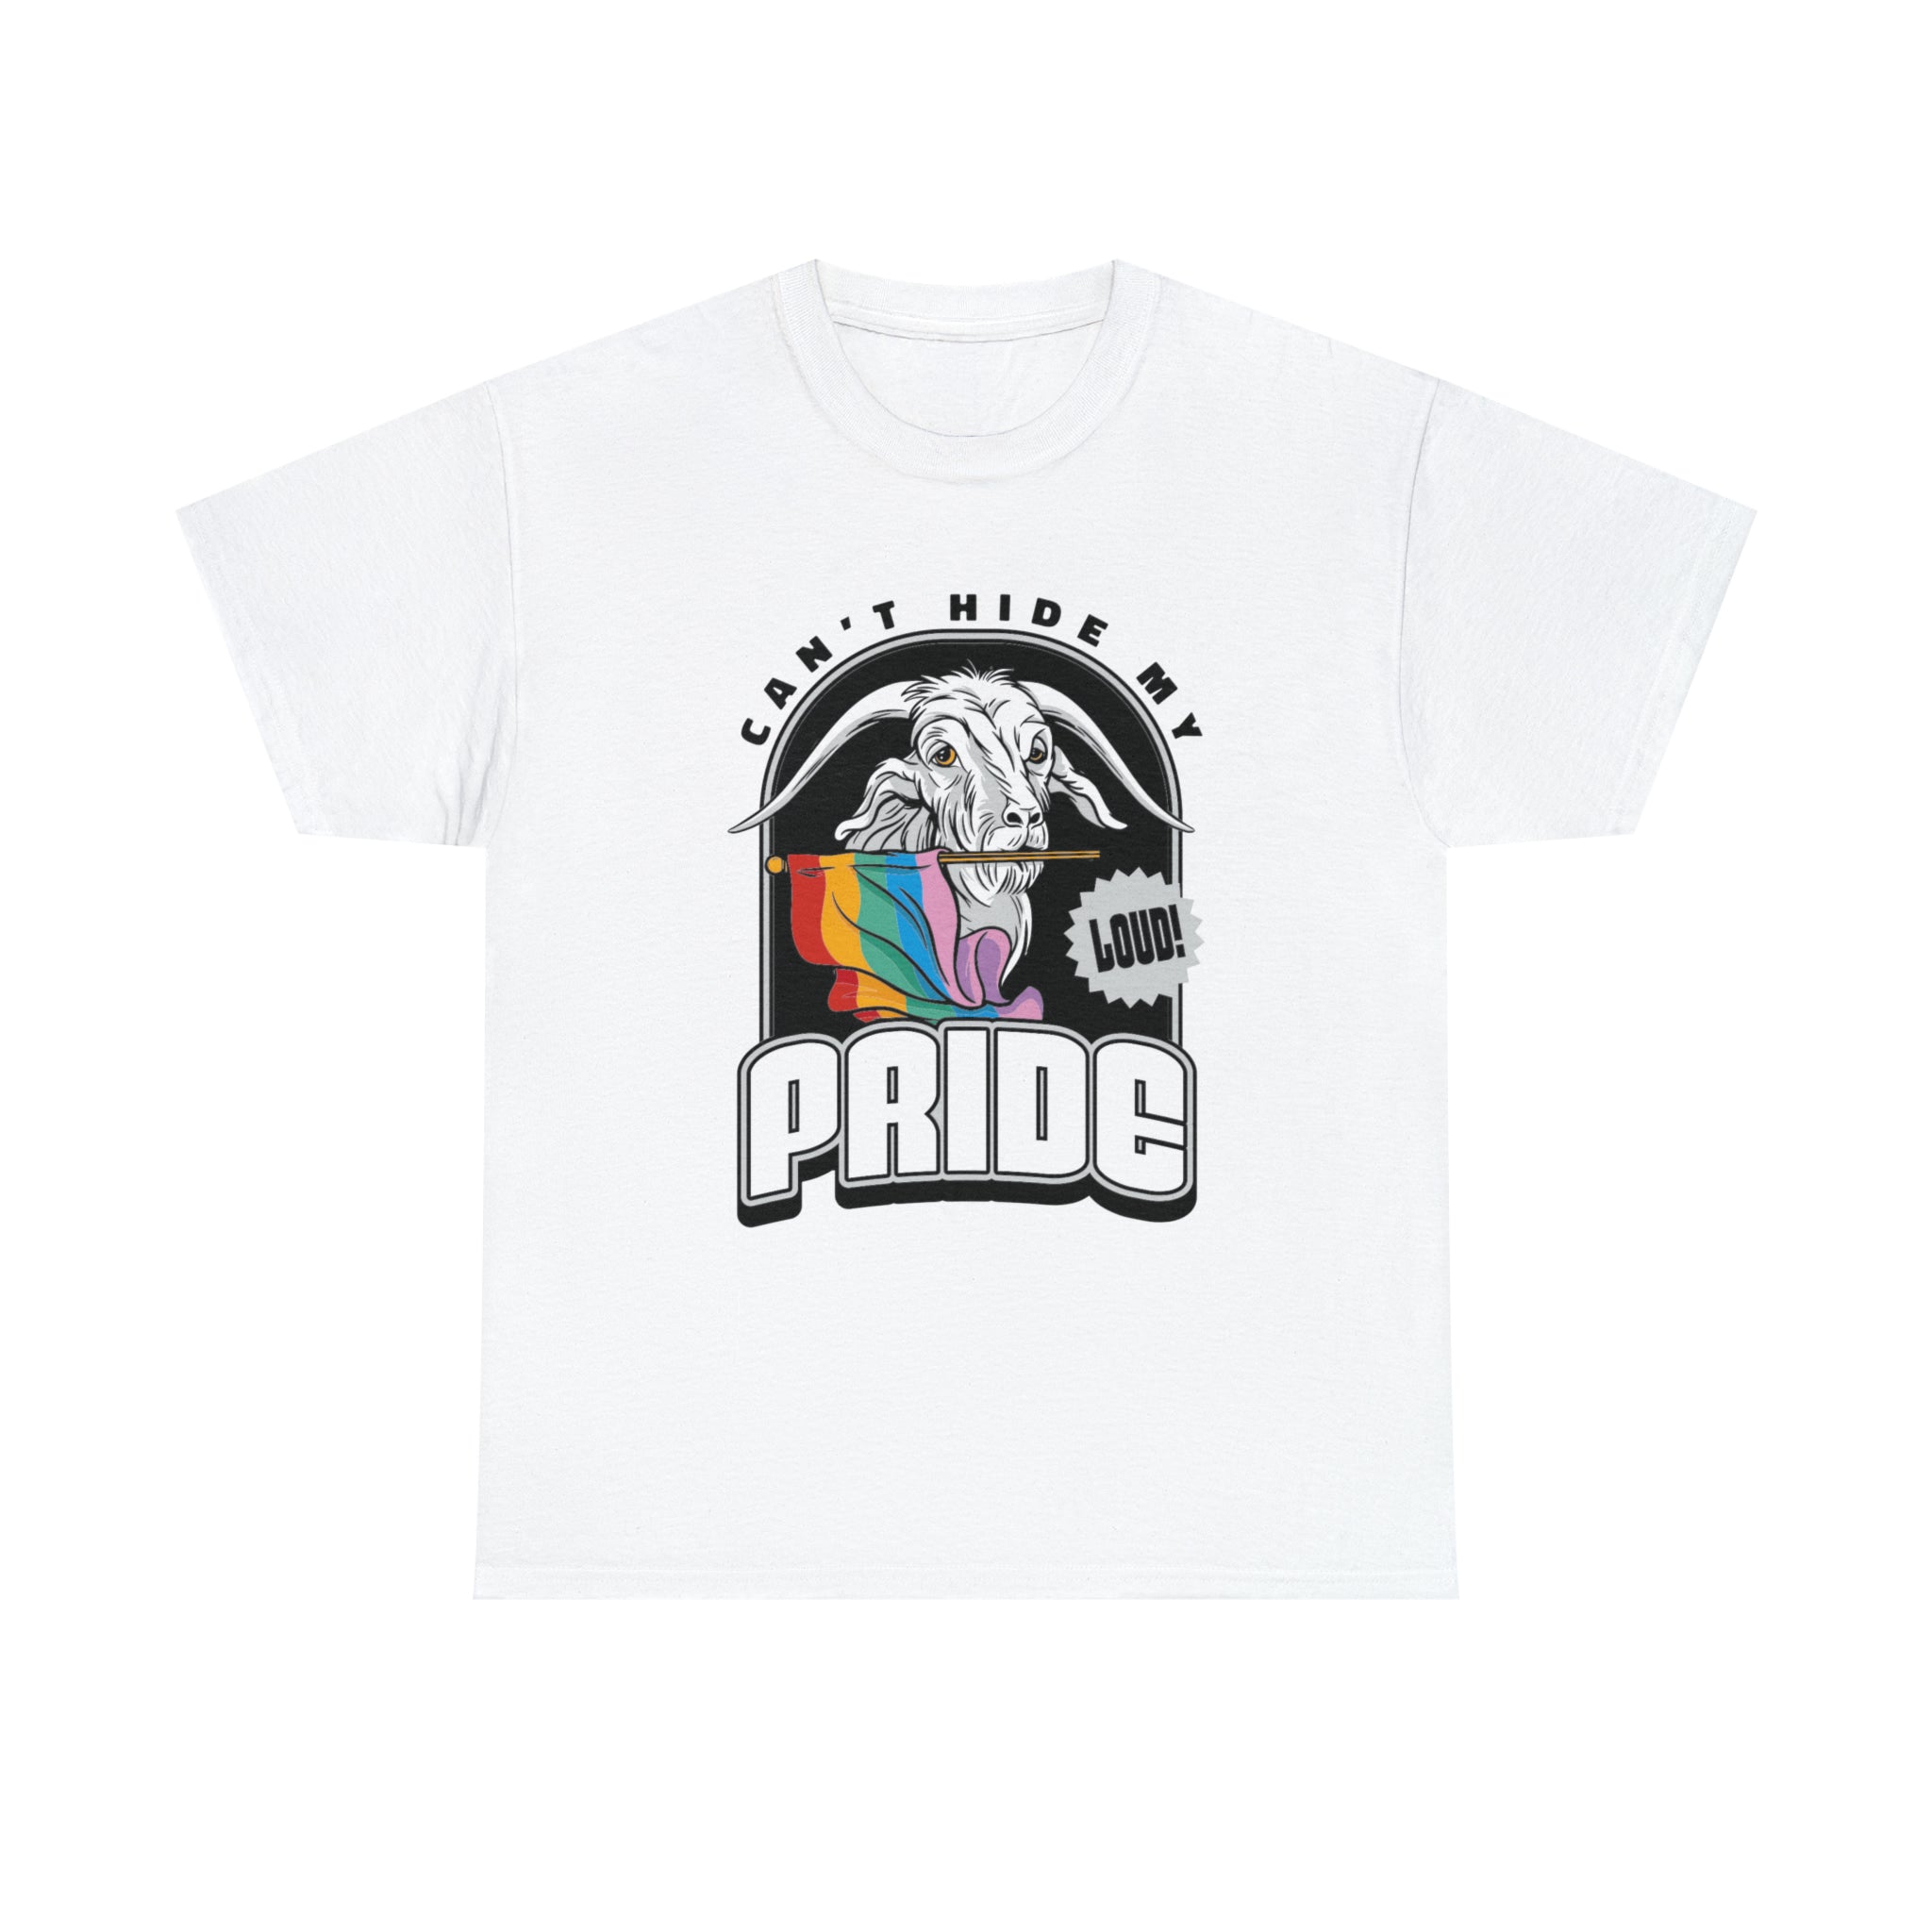 A white Can't Hide My Pride t-shirt by Printify with an image of a unicorn and a rainbow on it.